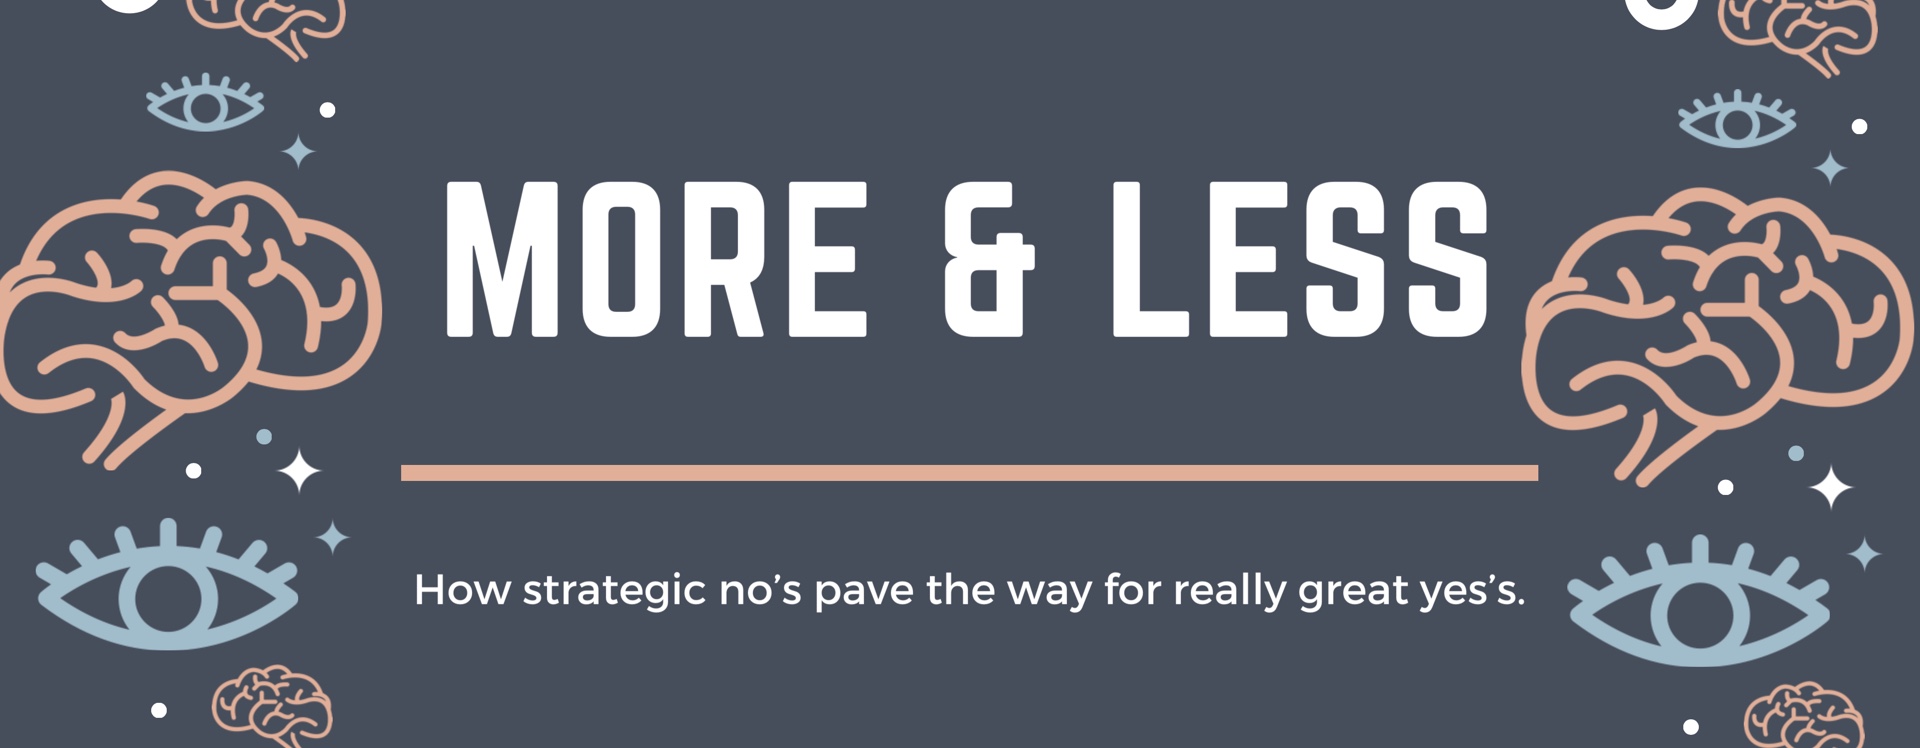 How strategic no’s make room for so much more of what you want and less of what you don’t.